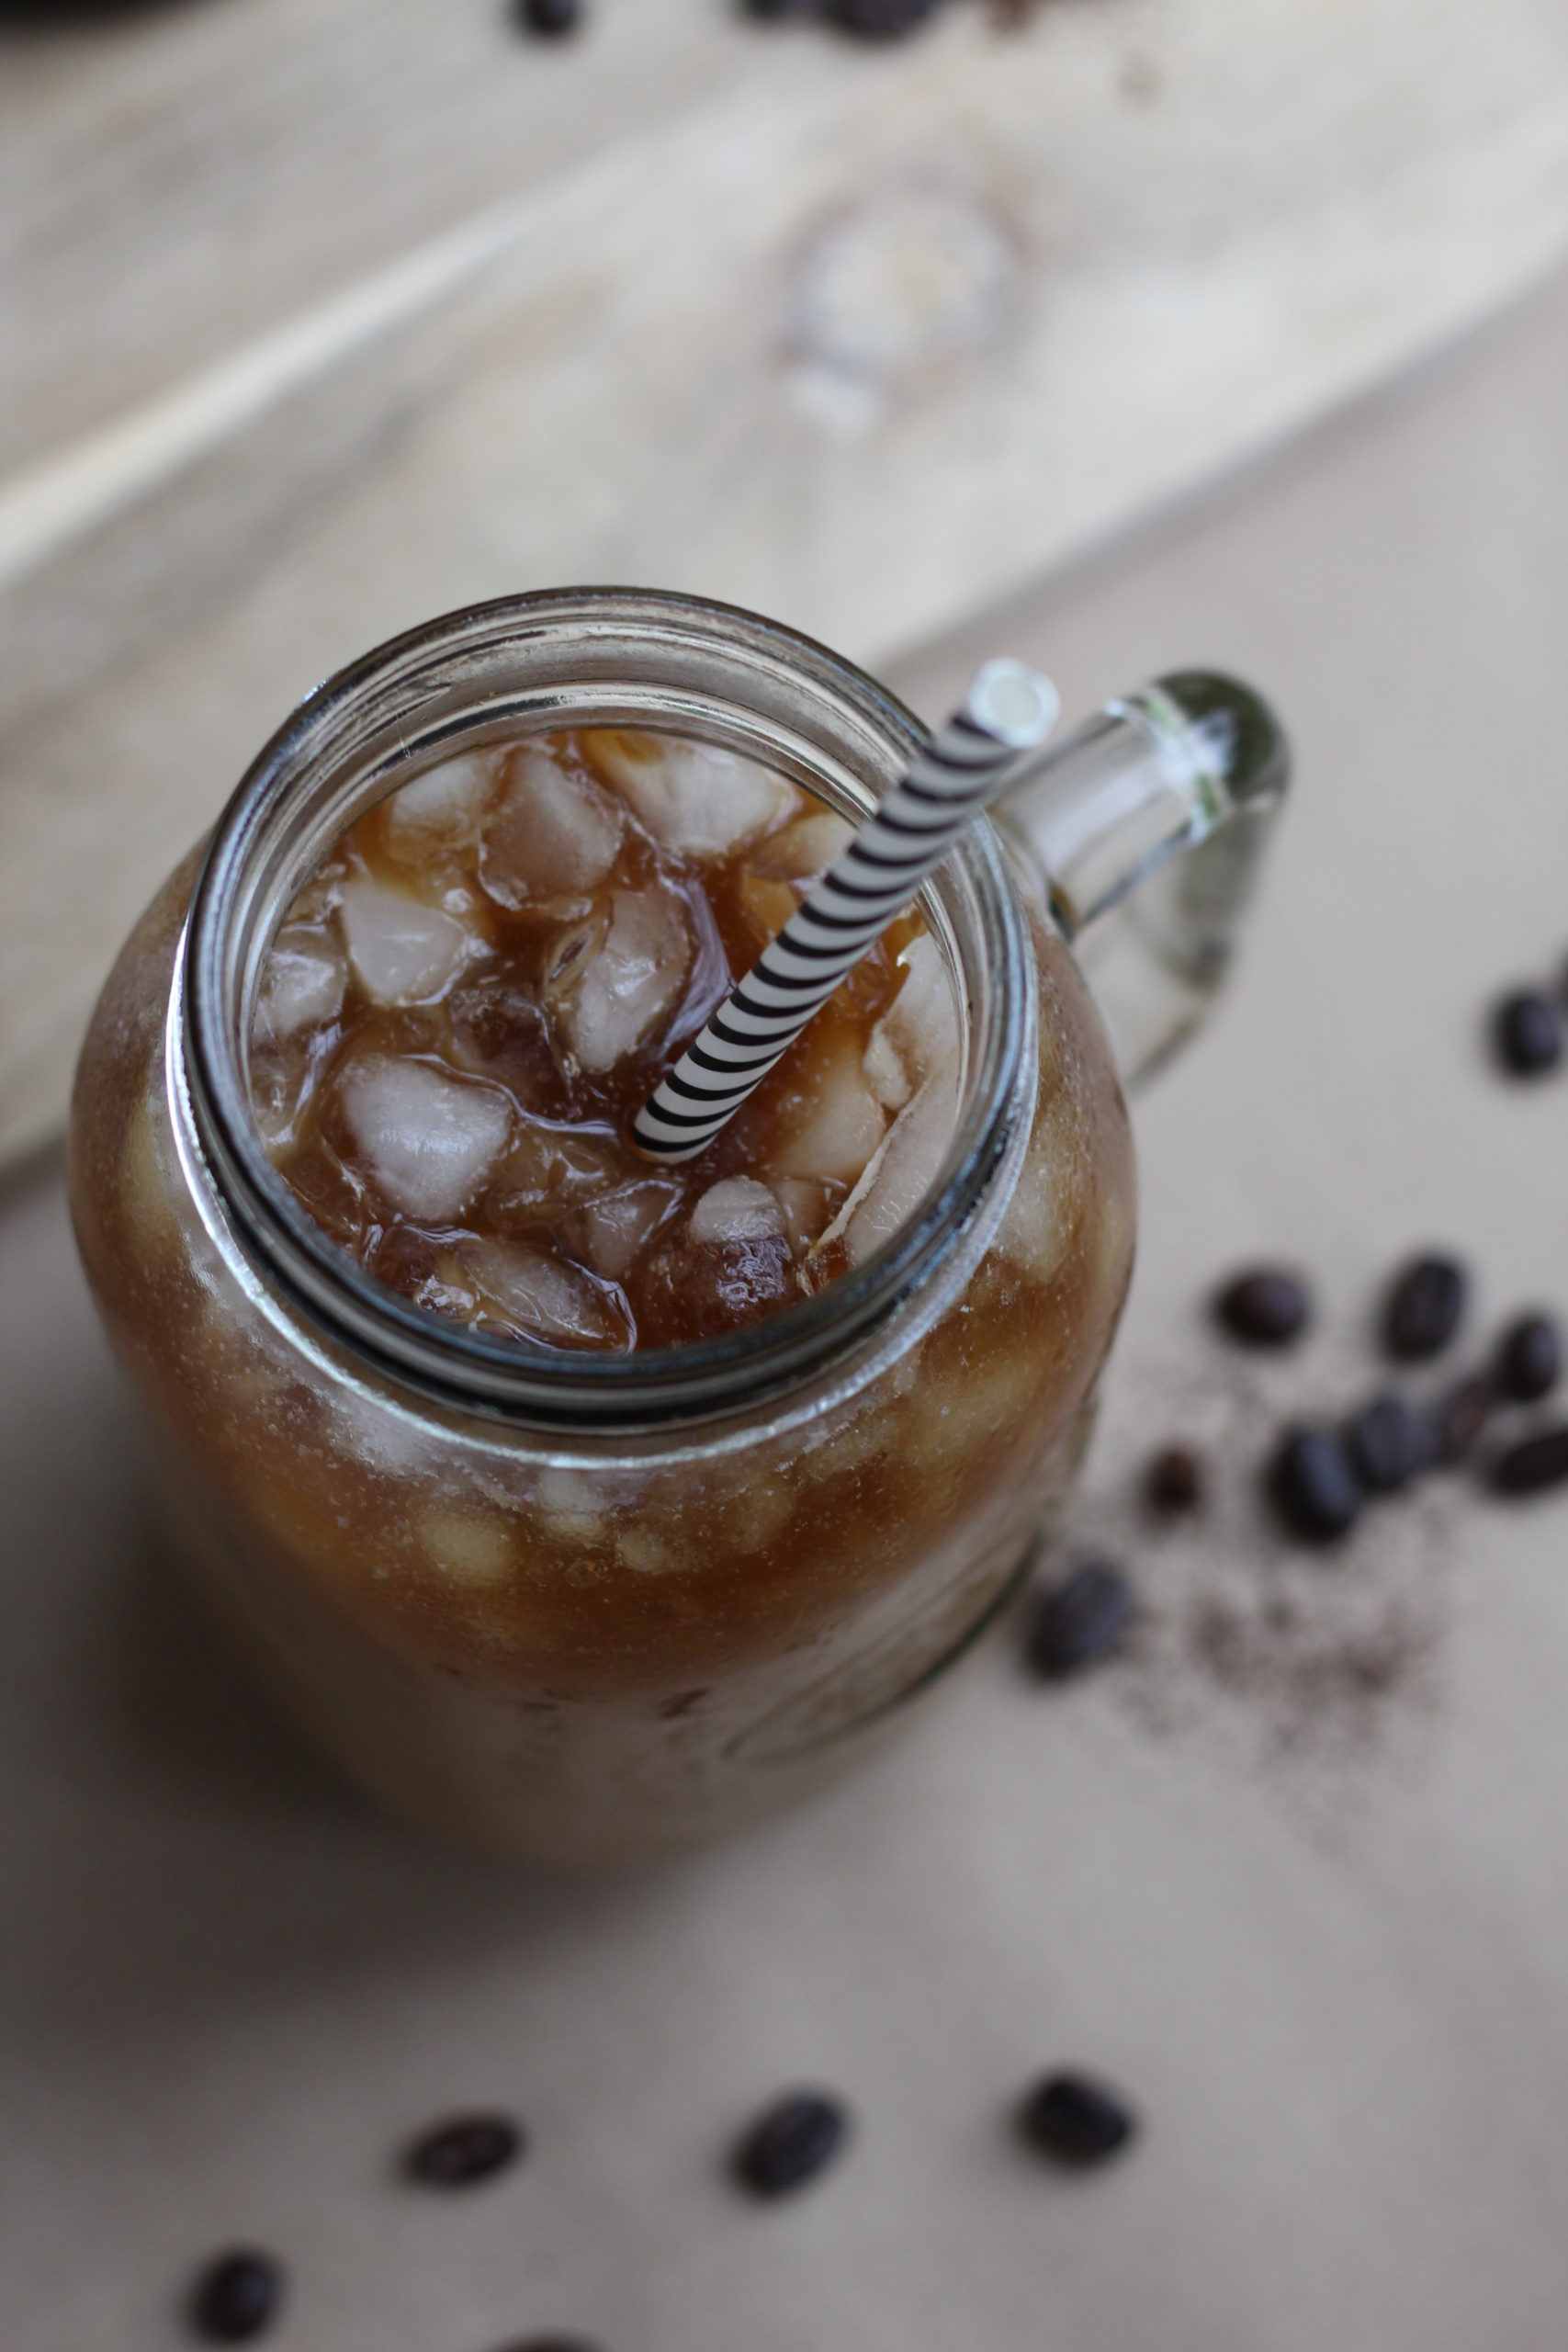 A glass jar with iced coffee and a striped straw